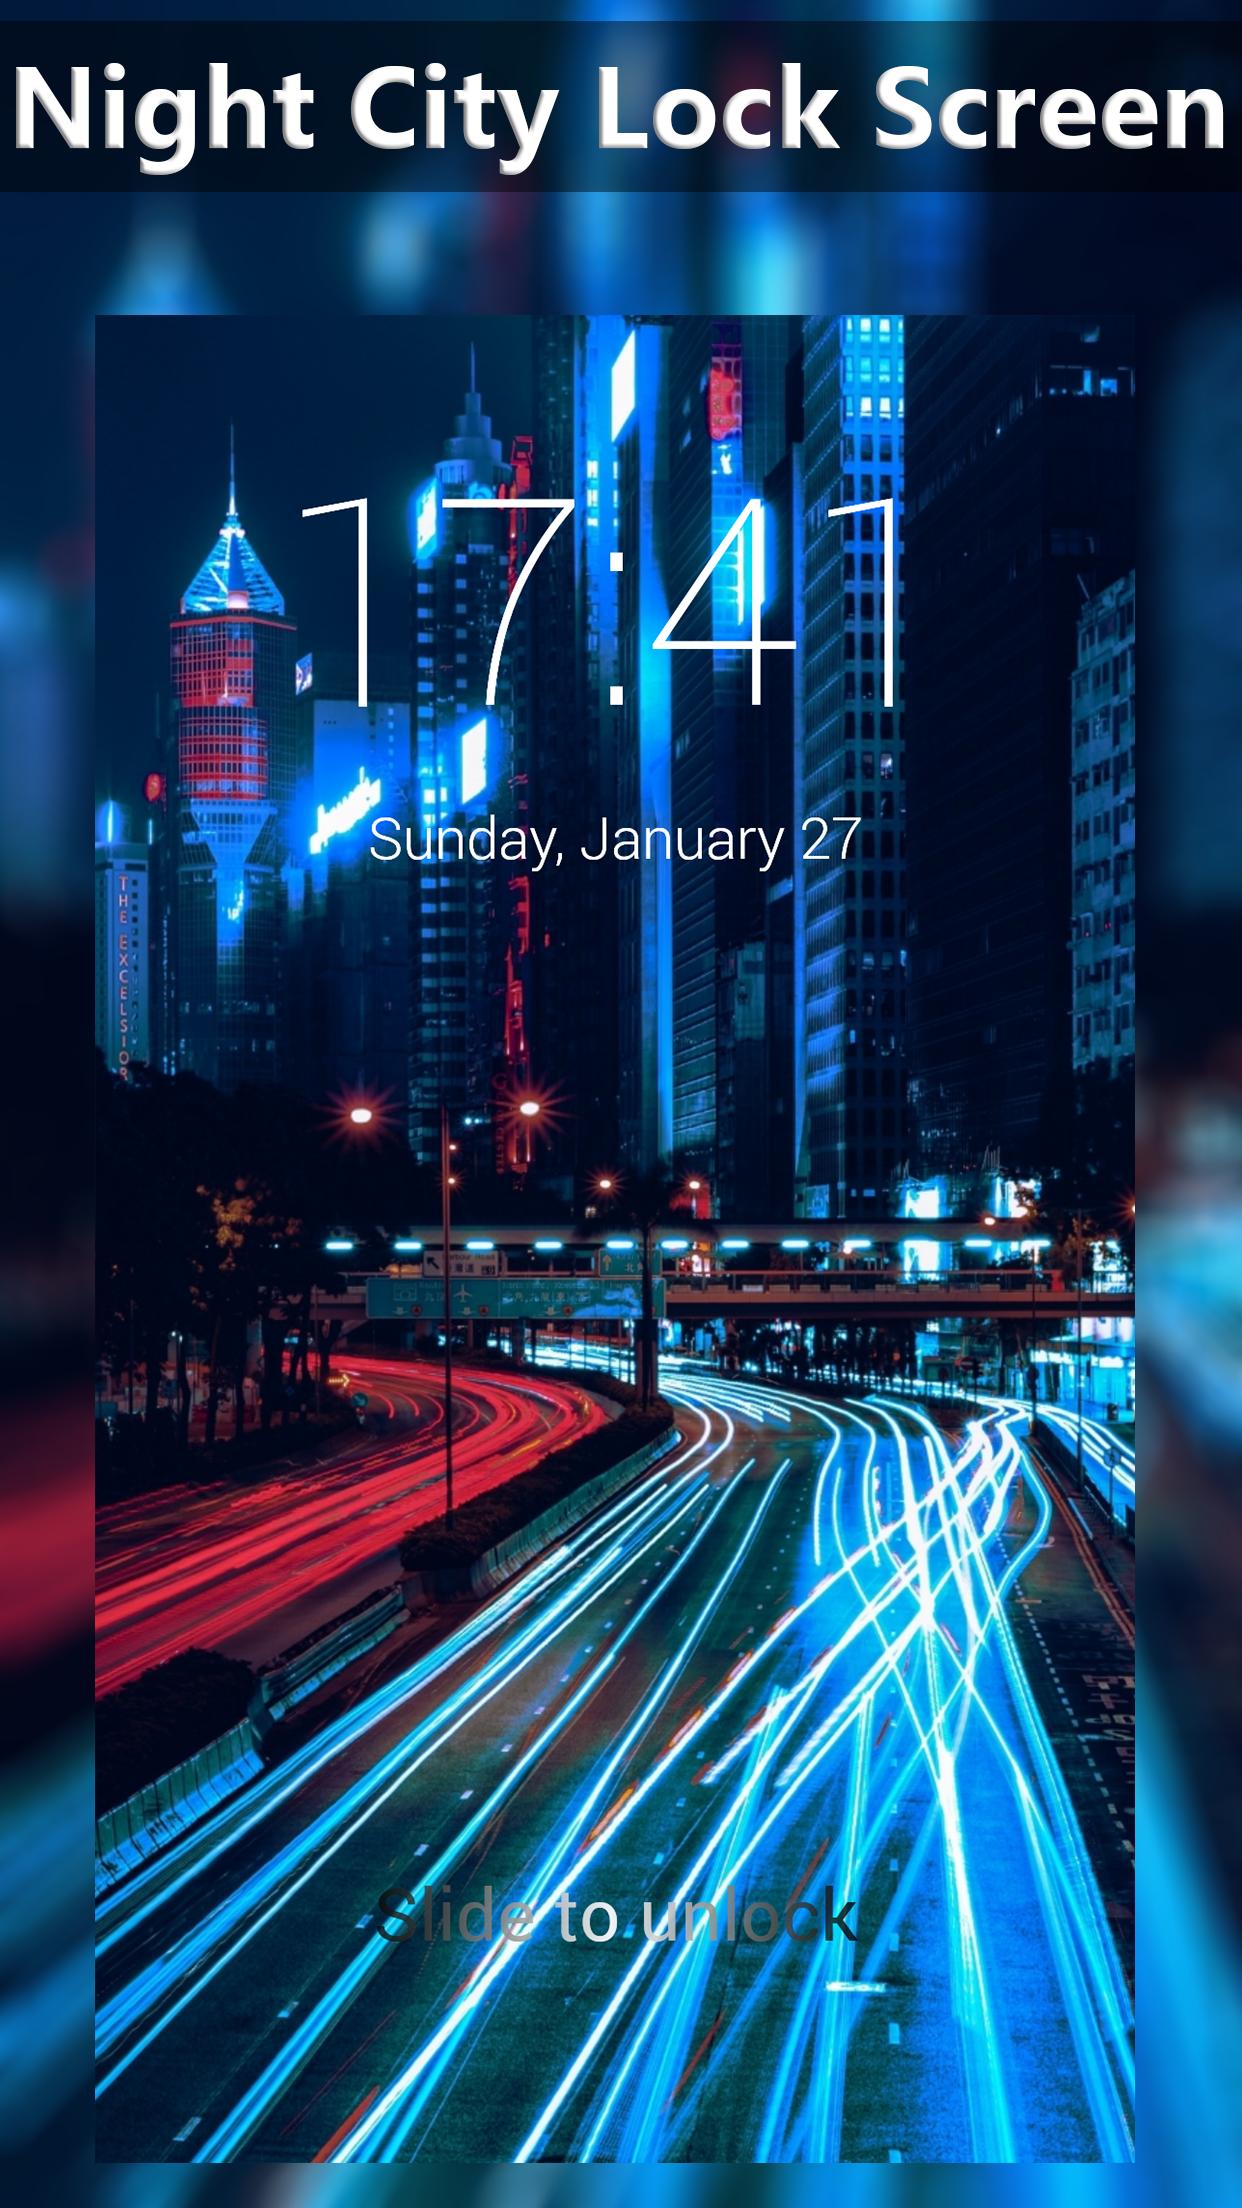 Night City Lock Screen Wallpaper For Android Apk